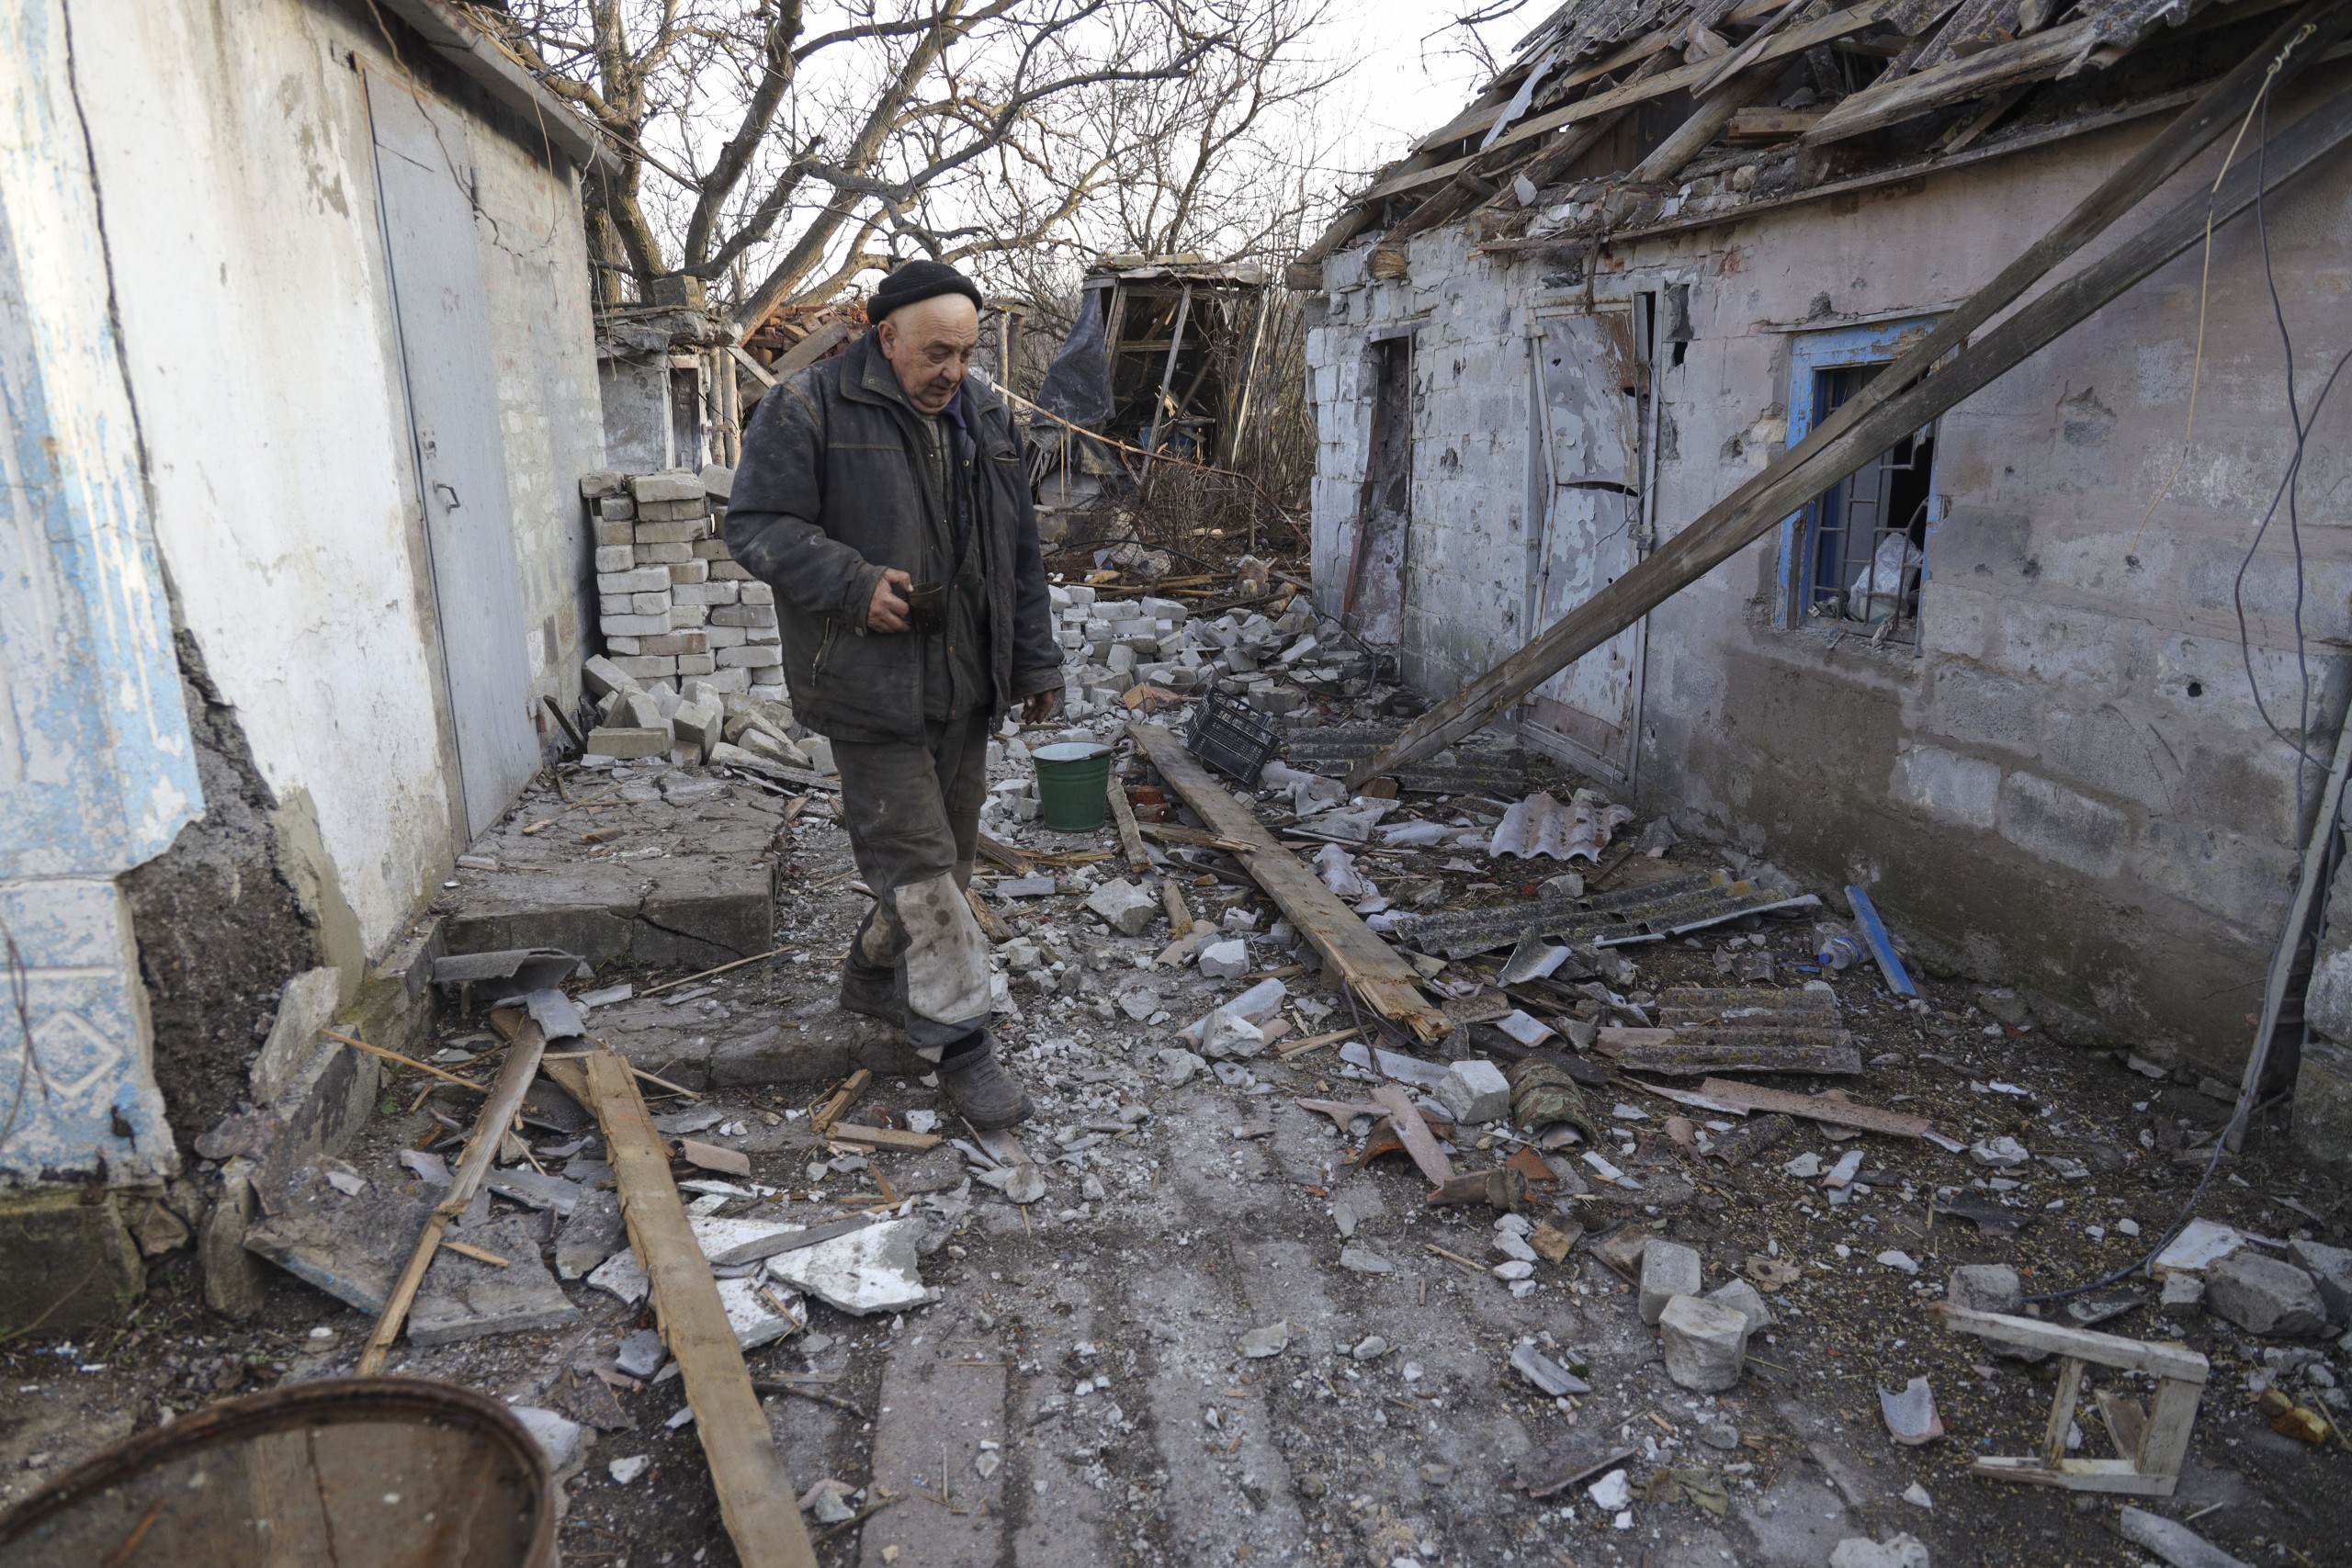 epa09774802 Local resident Valery walks around a damaged homestead as a result of shelling in Tamarchuk village near Marinka not far from pro-Russian militants controlled city of Donetsk, Ukraine, 20 February 2022. Tamarchuk only has 15 local residents and it is placed in a ‘grey zone’ between Ukraine and Pro-Russian militants. There are no Ukraine troops in the village but it has been getting shelled by militants for three days in a row. The last shelling was on 9 am on 20 February.  EPA/STANISLAV KOZLIUK  ATTENTION: This Image is part of a PHOTO SET